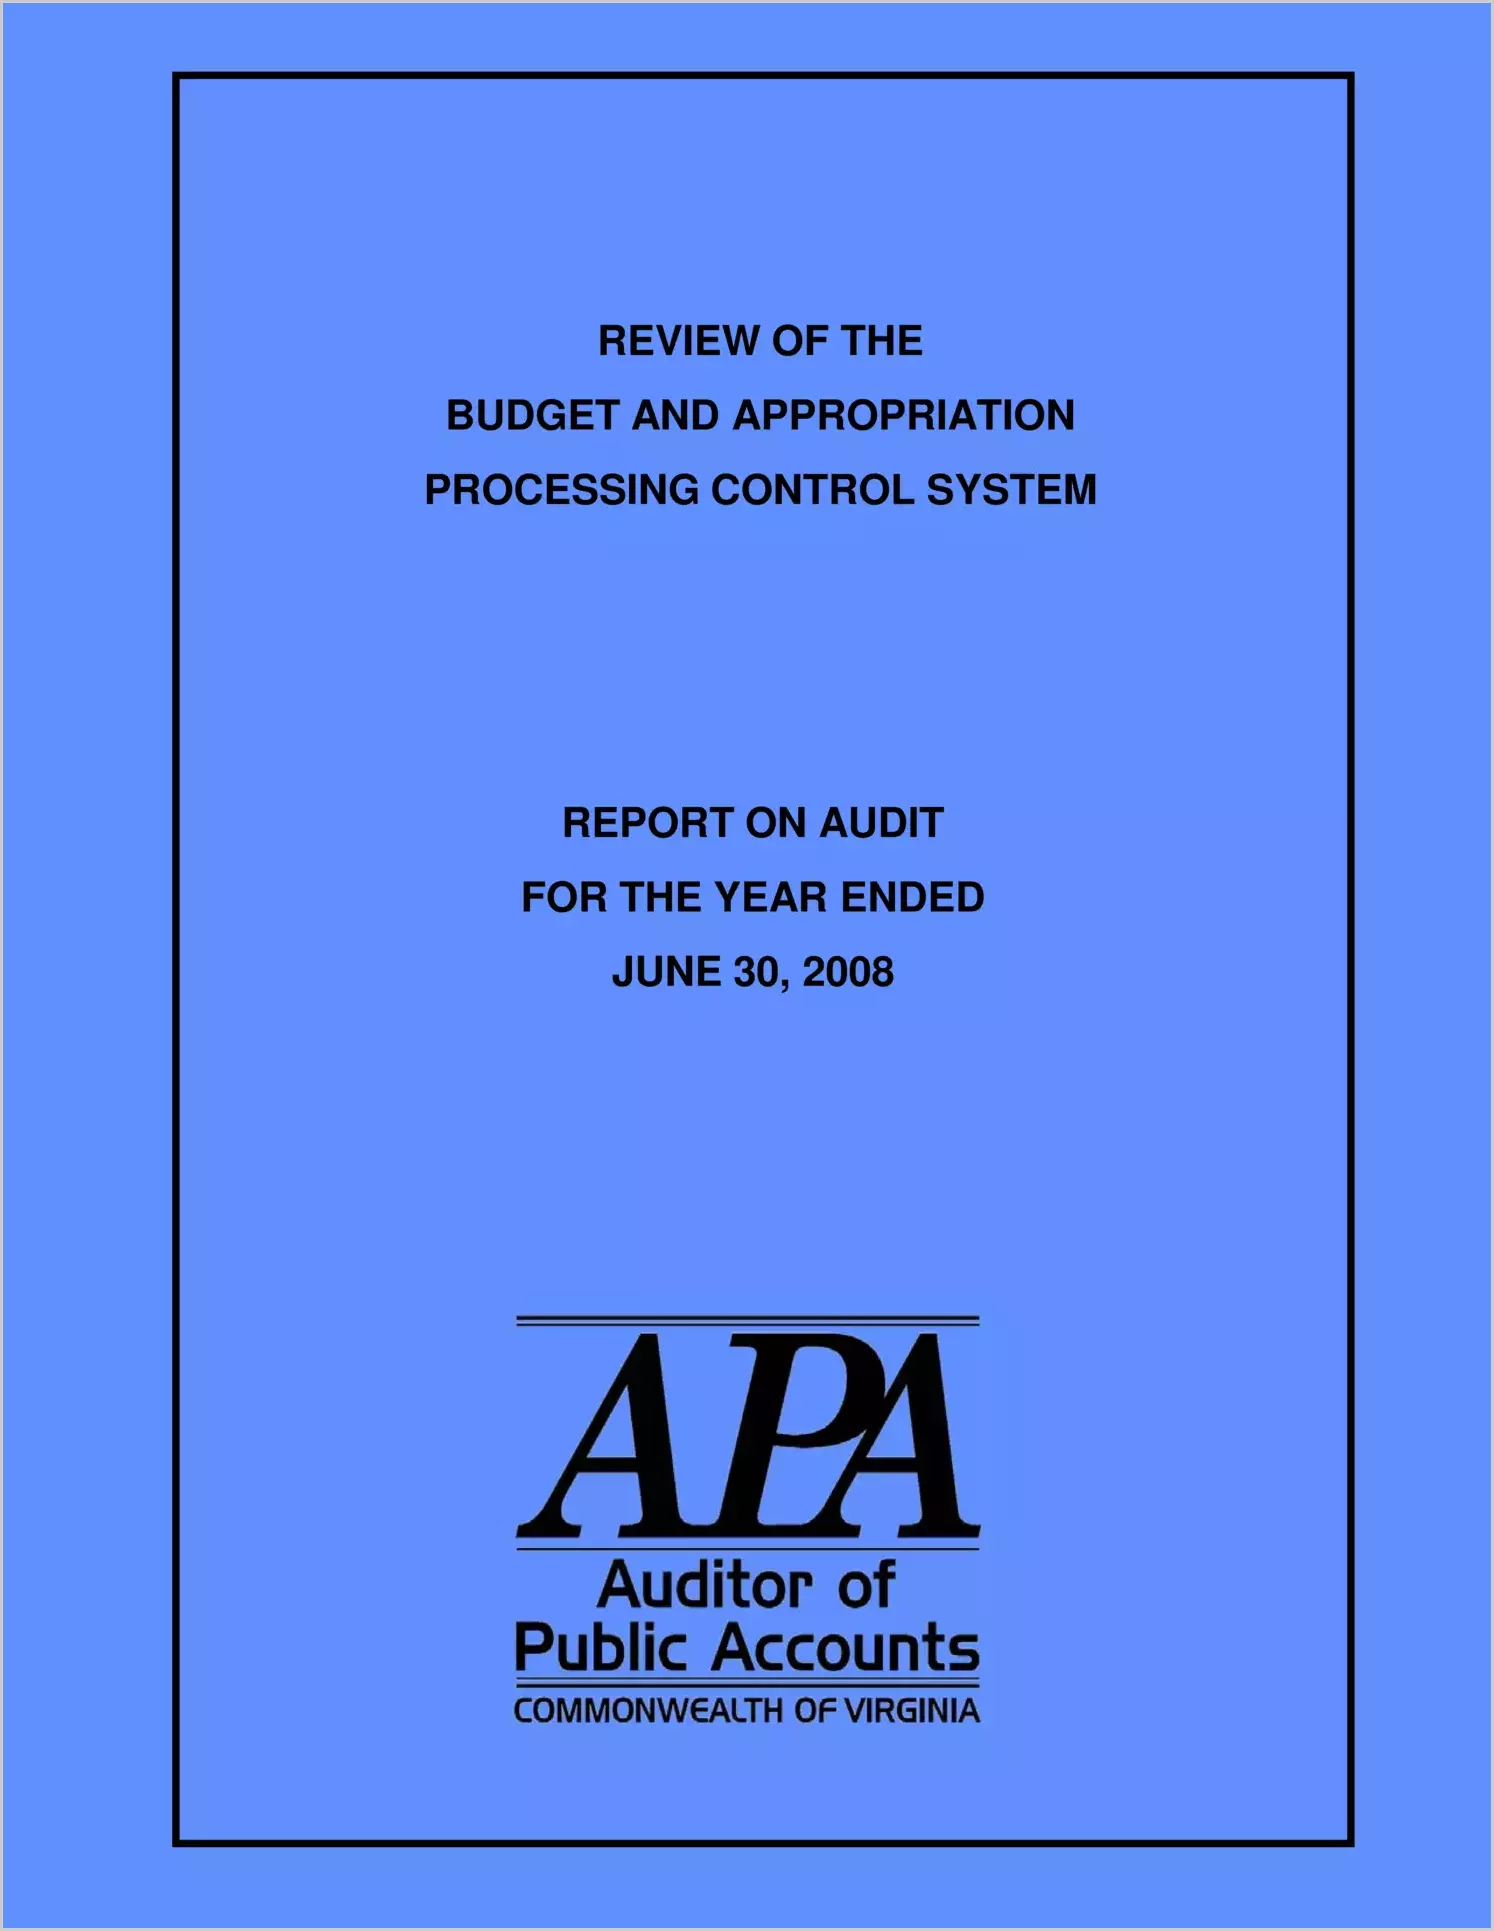 Report on Budget and Appropriation Processing Control System For Fiscal Year Ended June 30, 2008